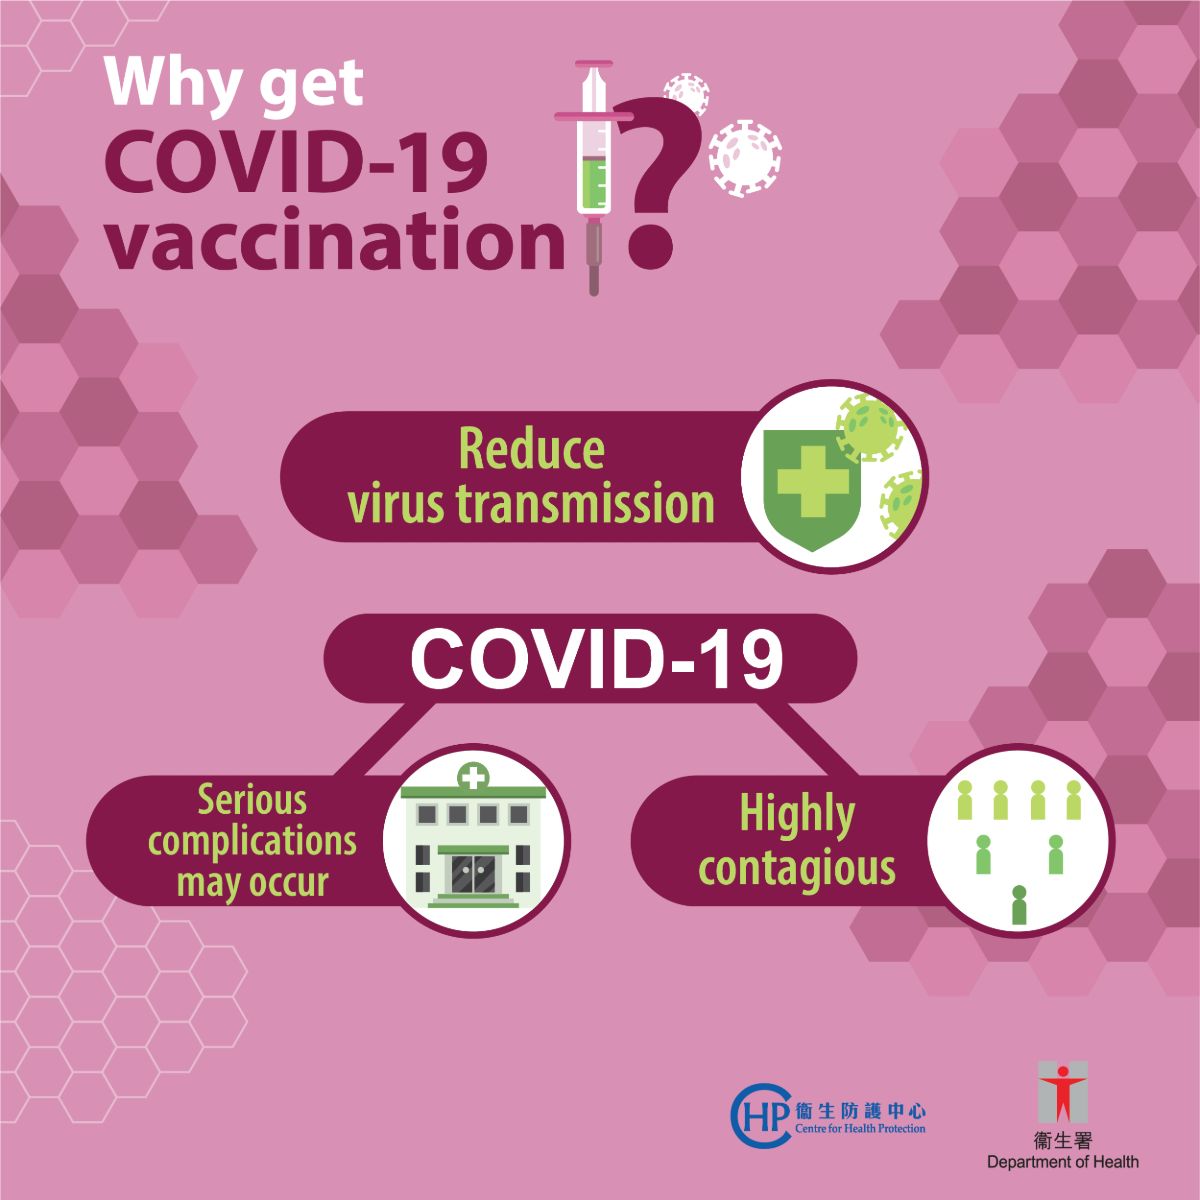 "Why We Should Get COVID-19 Vaccination" Series: Reduce virus transmission